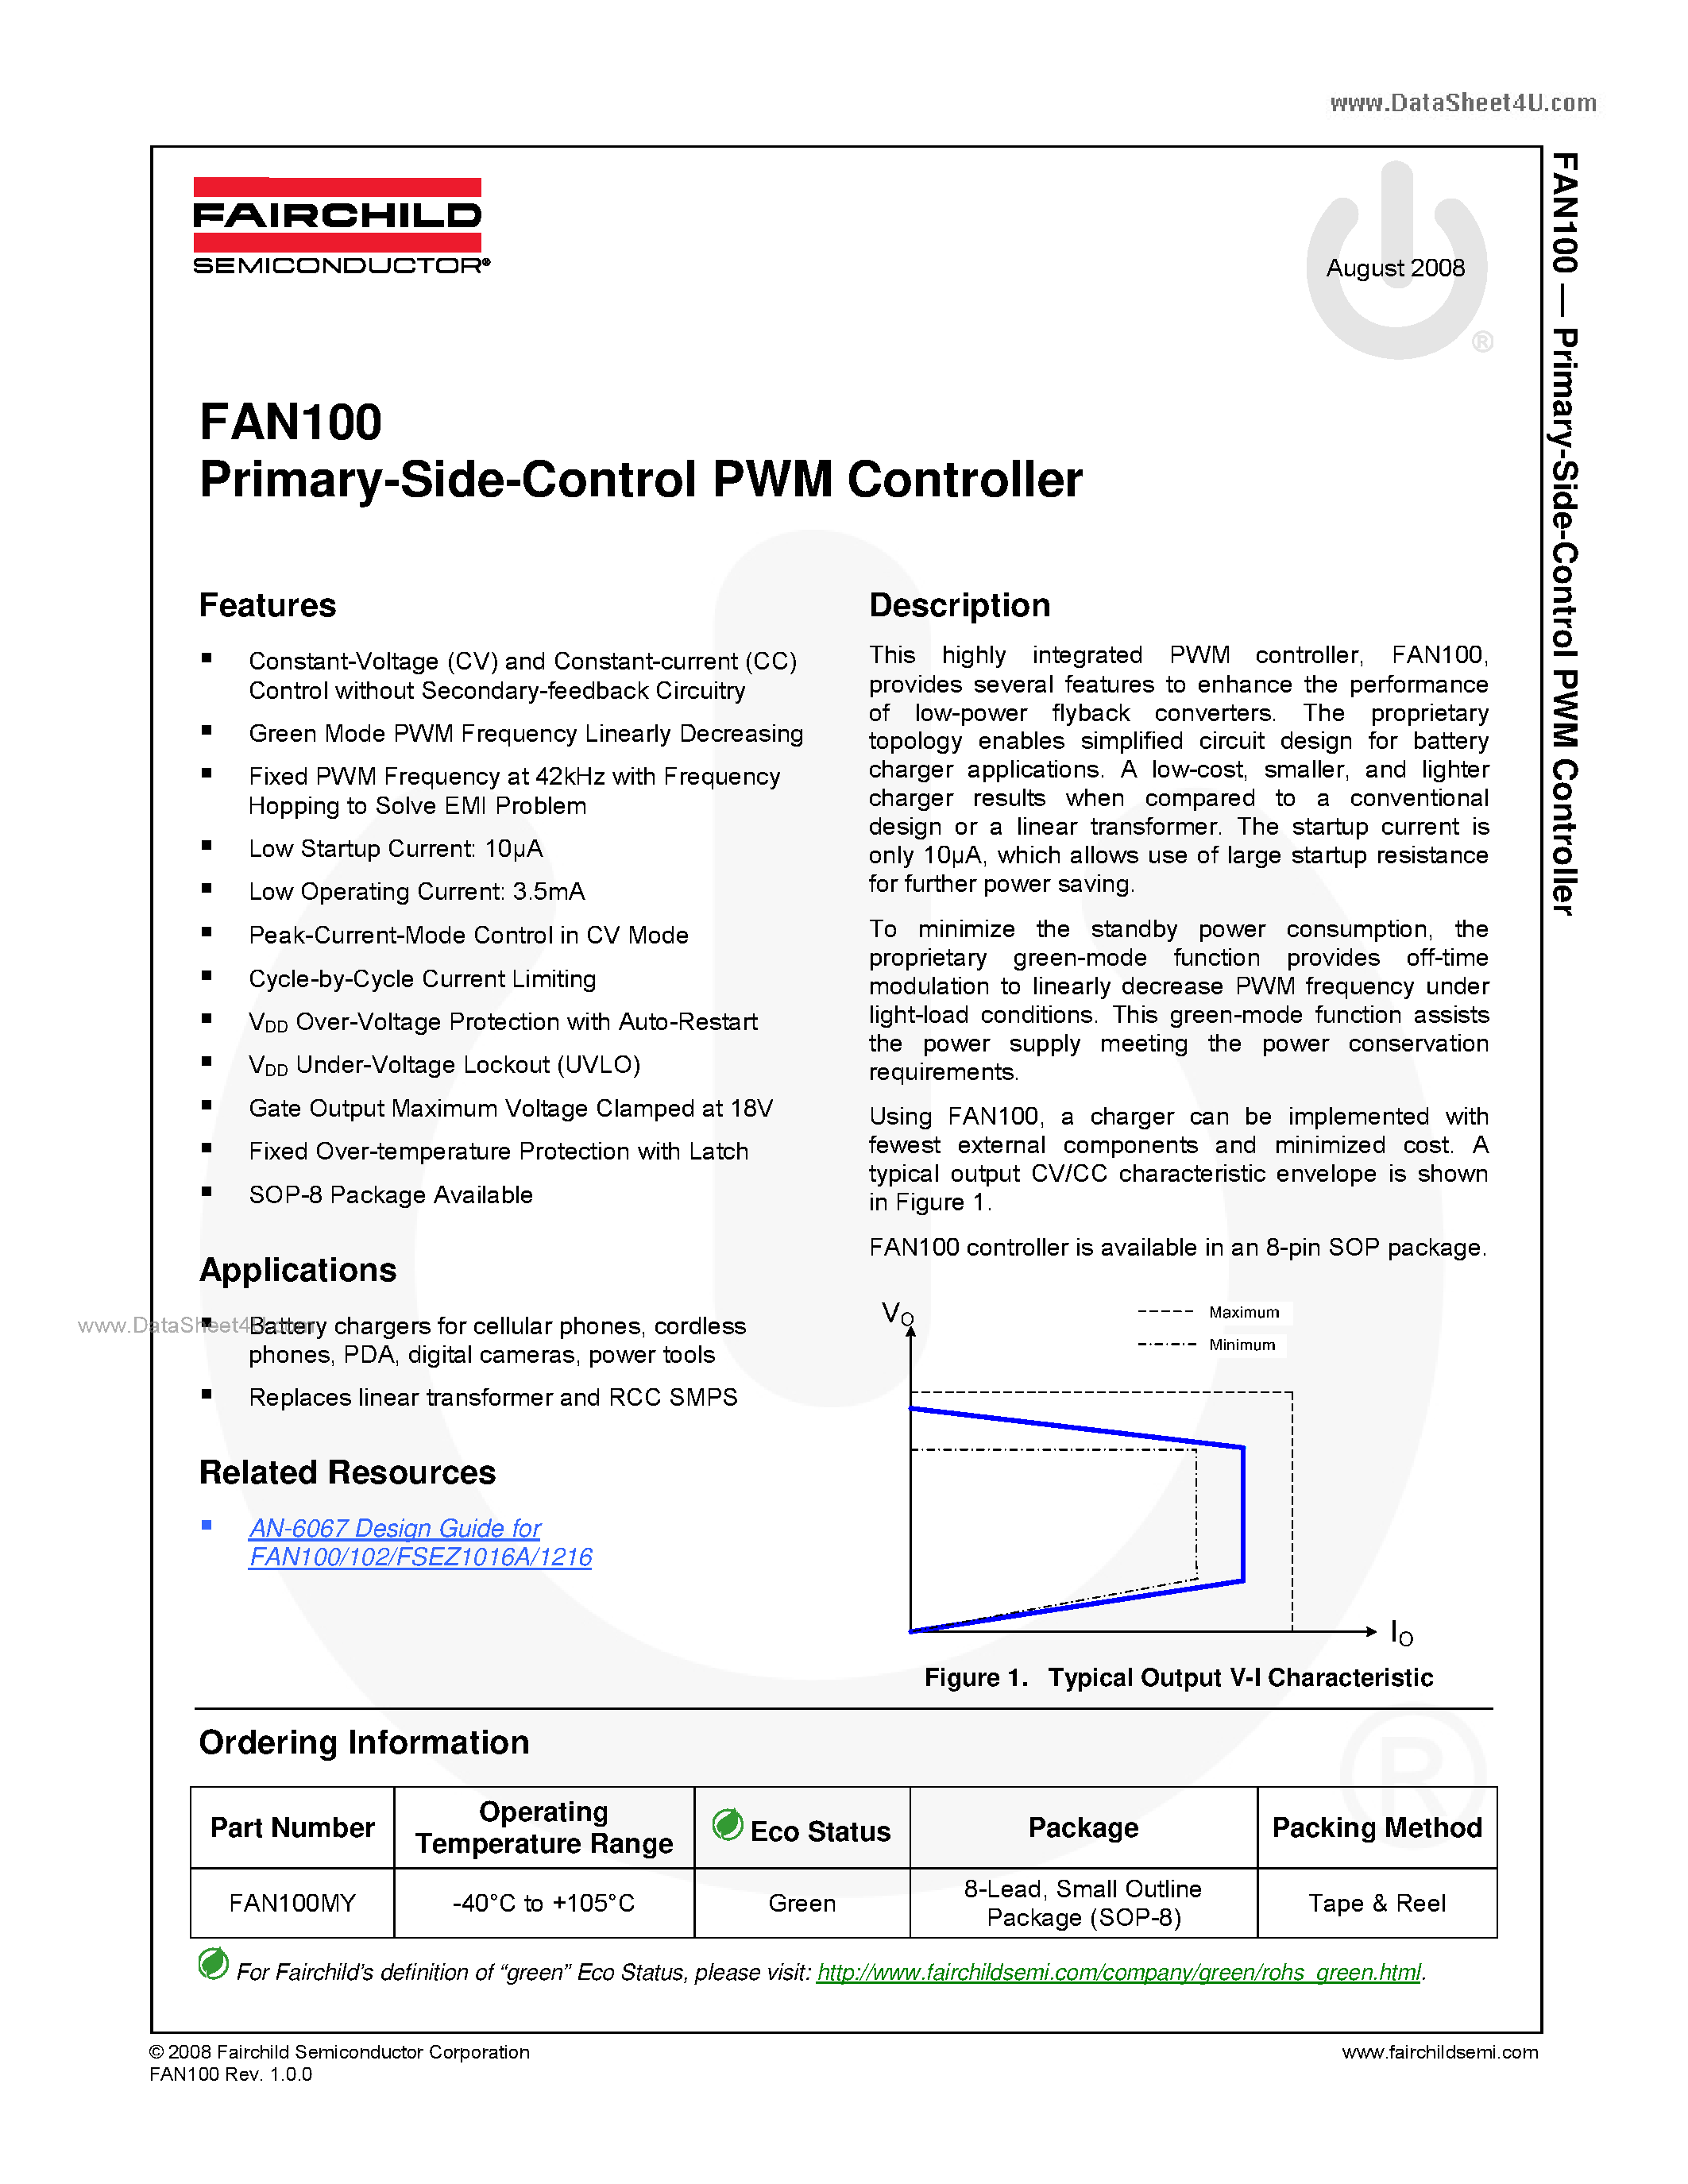 Даташит FAN100 - Primary-Side-Control PWM Controller страница 1